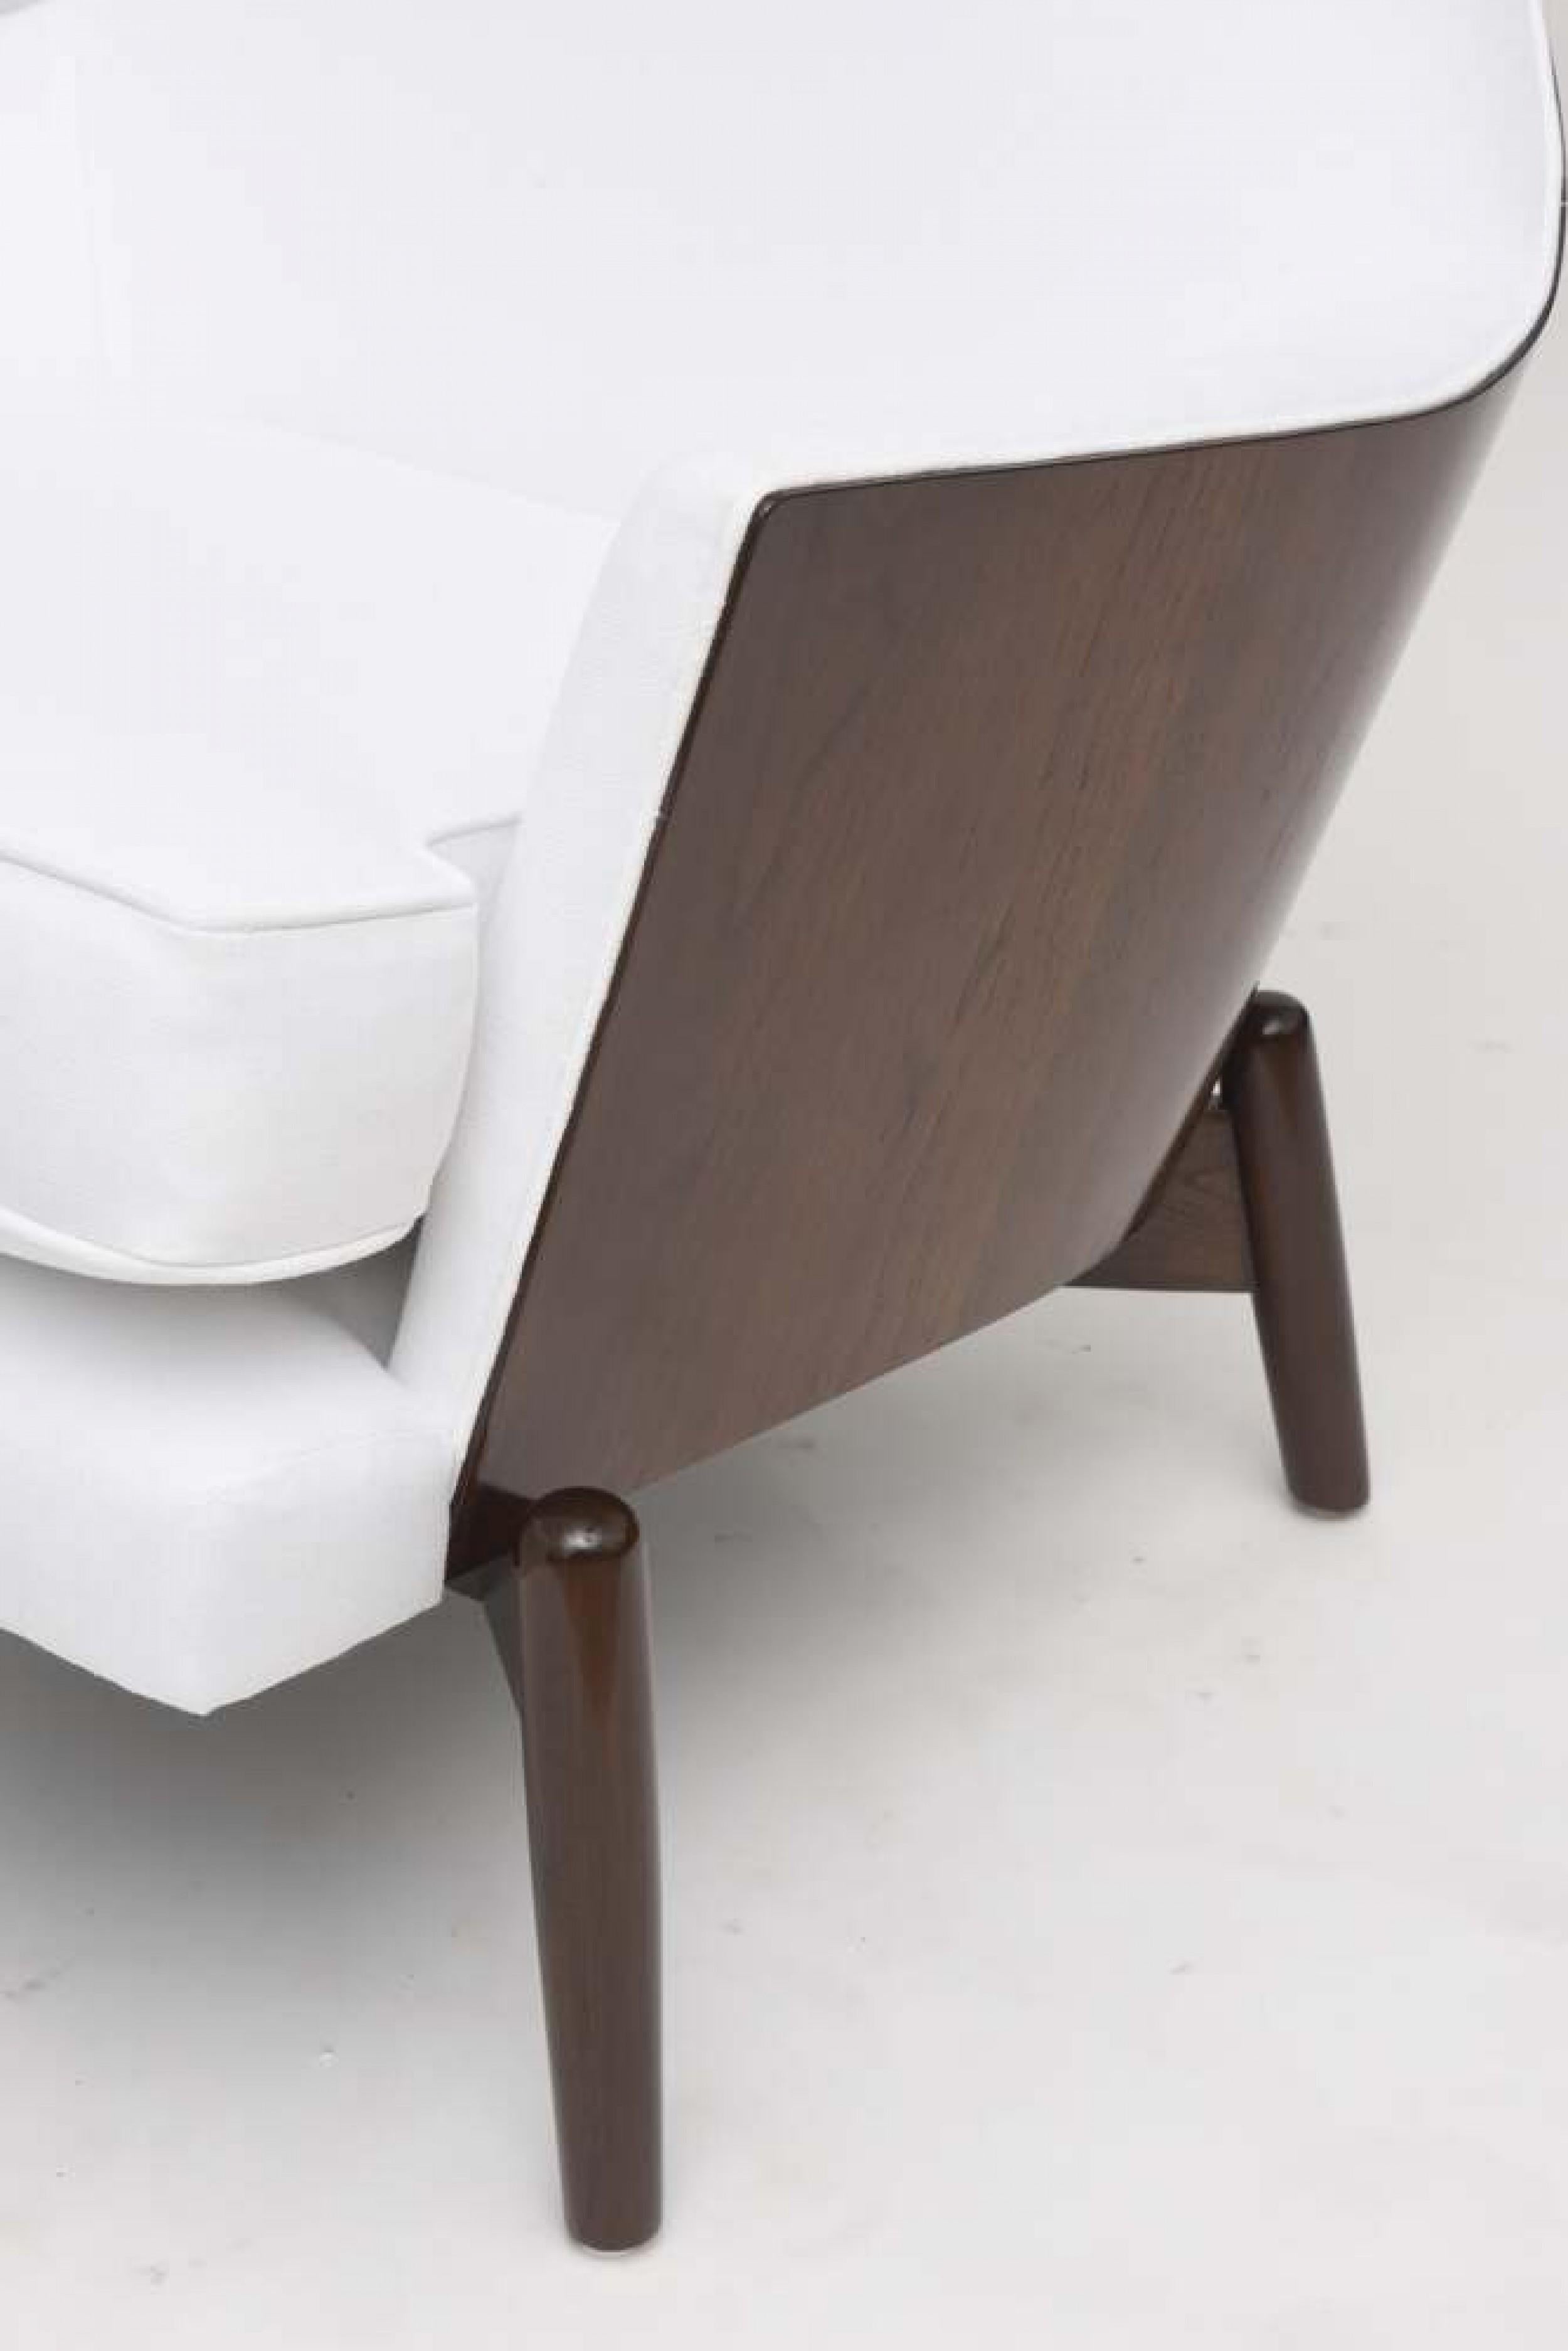 Ib Kofod Larsen Midcentury Danish Modern Walnut and White Upholstery Armchair In Good Condition For Sale In New York, NY